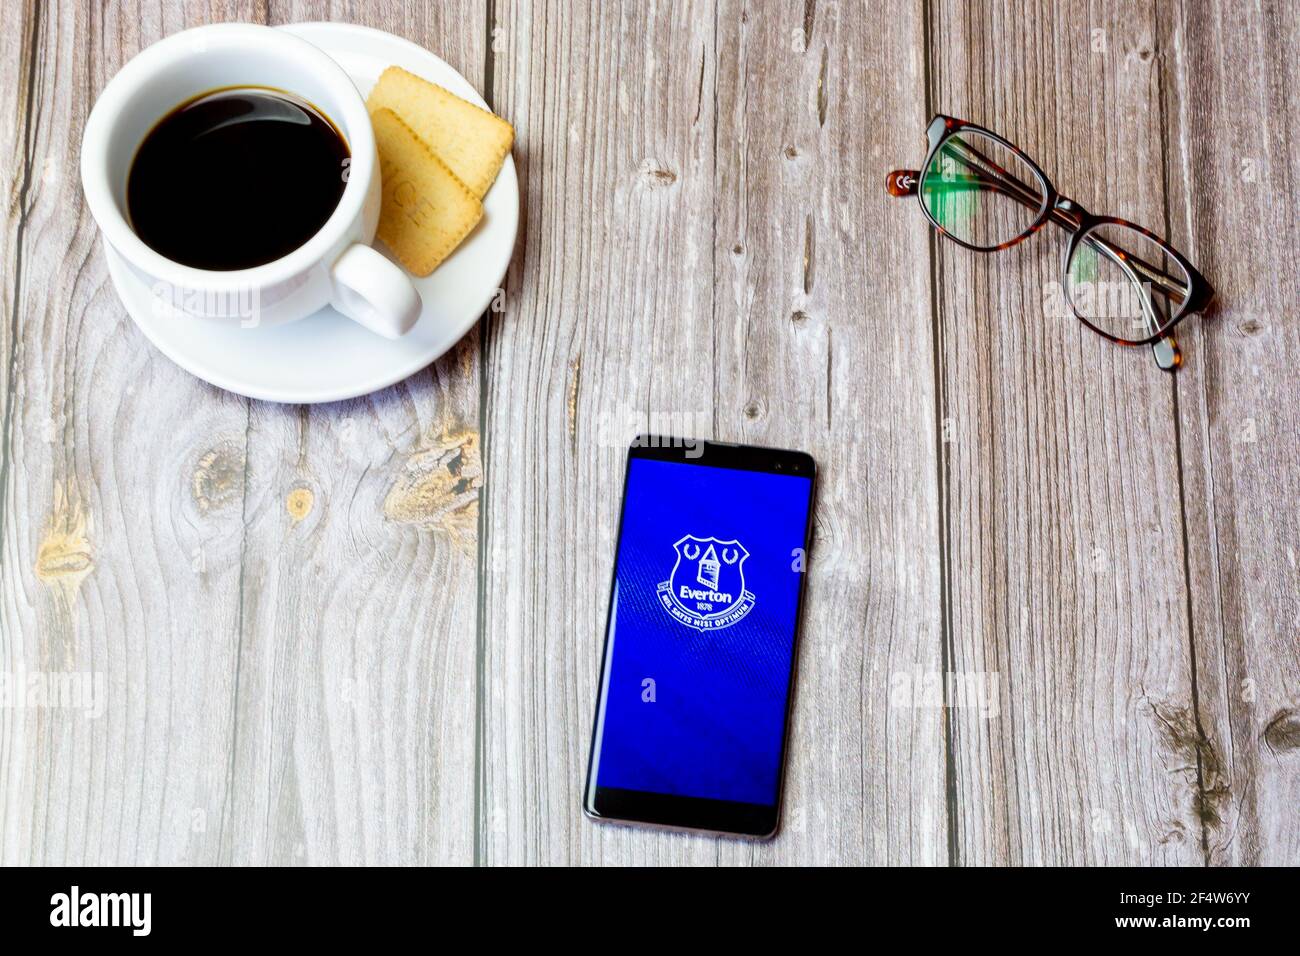 A mobile phone or cell phone laid on a wooden table with the Everton football club app open on screen Stock Photo